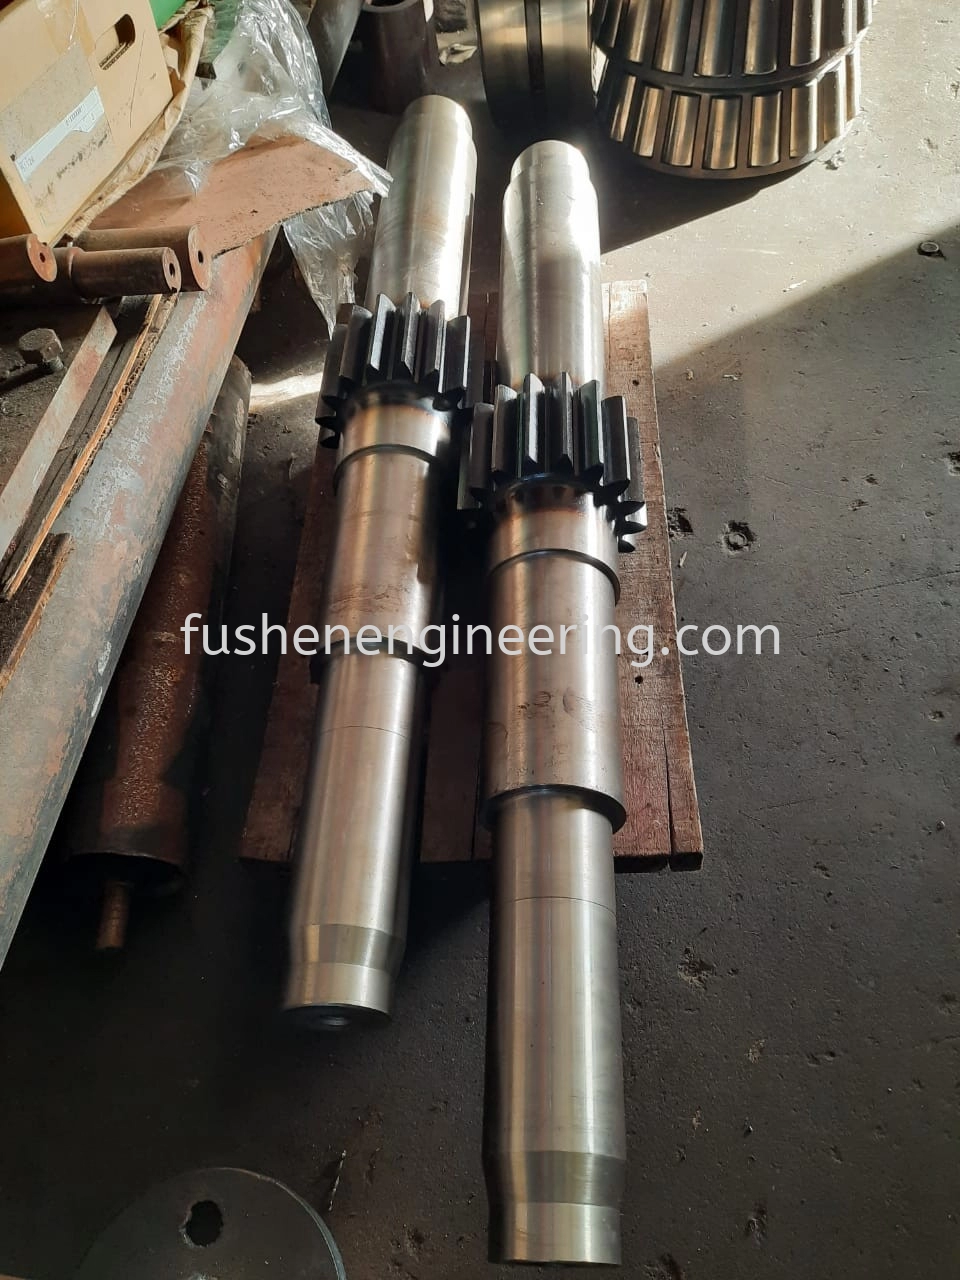 To machining and hardening of 705 Steel Shaft Gear.